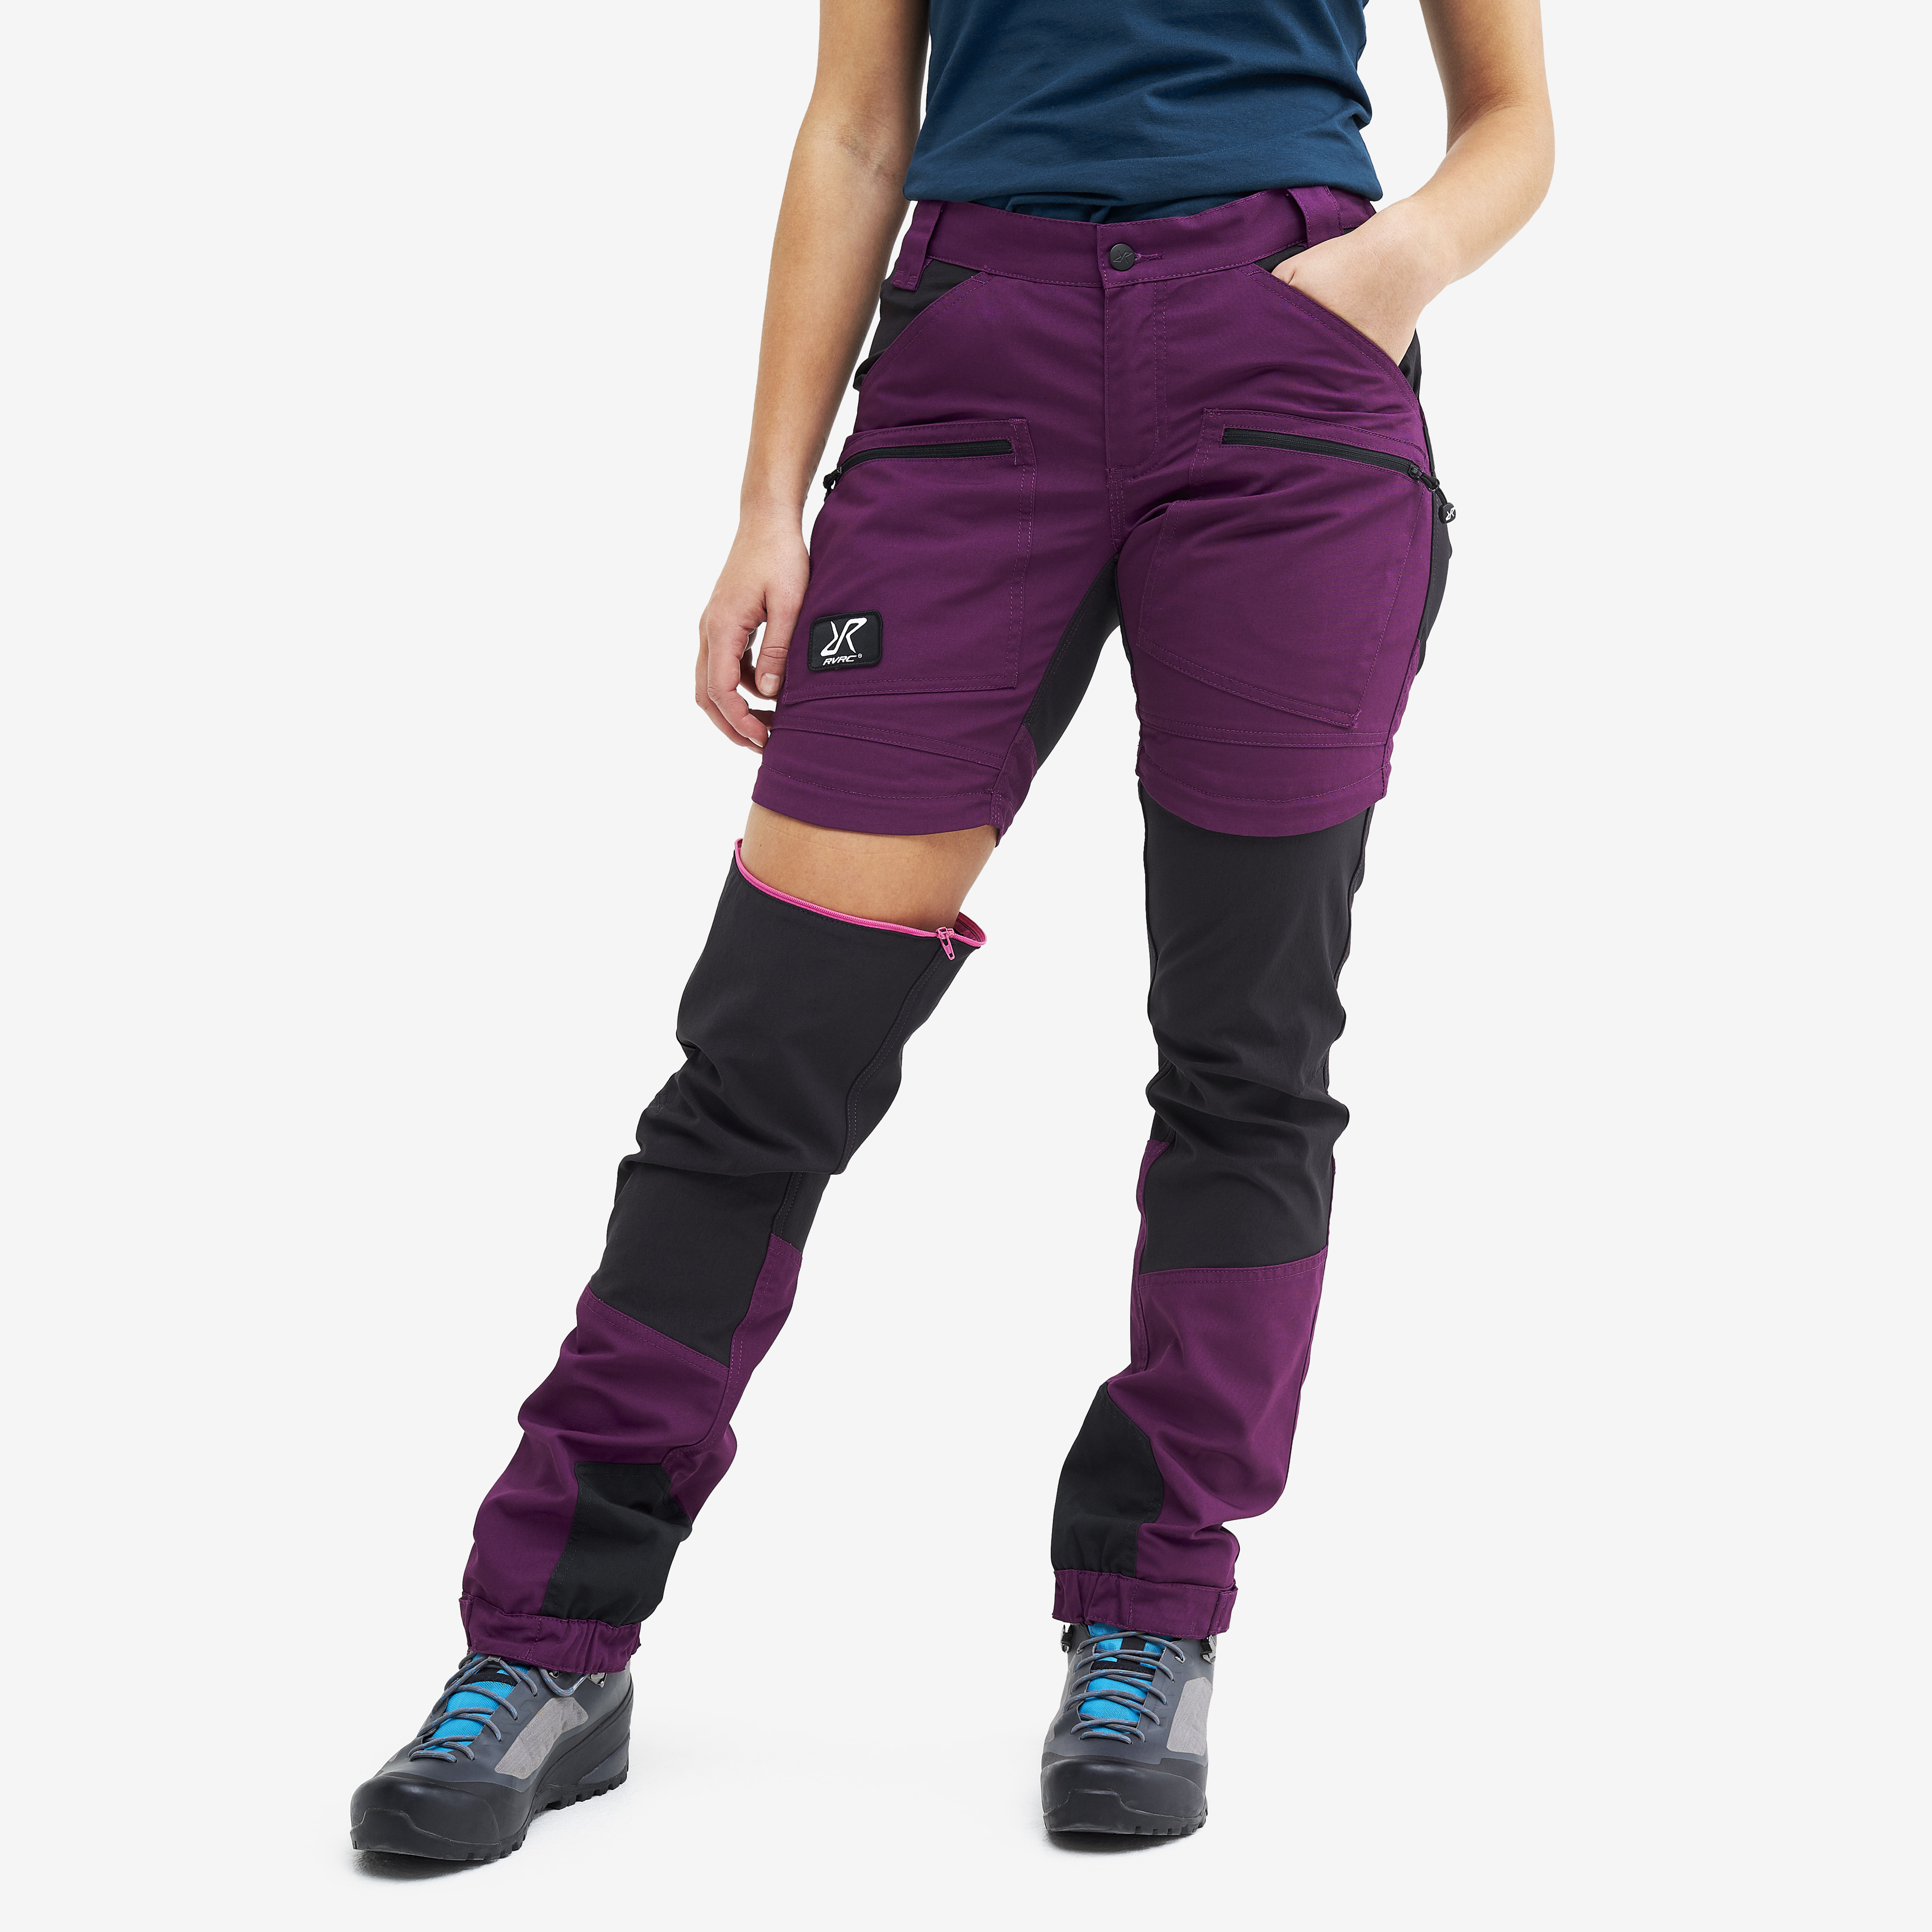 Nordwand Pro Zip-off hiking pants for women in purple